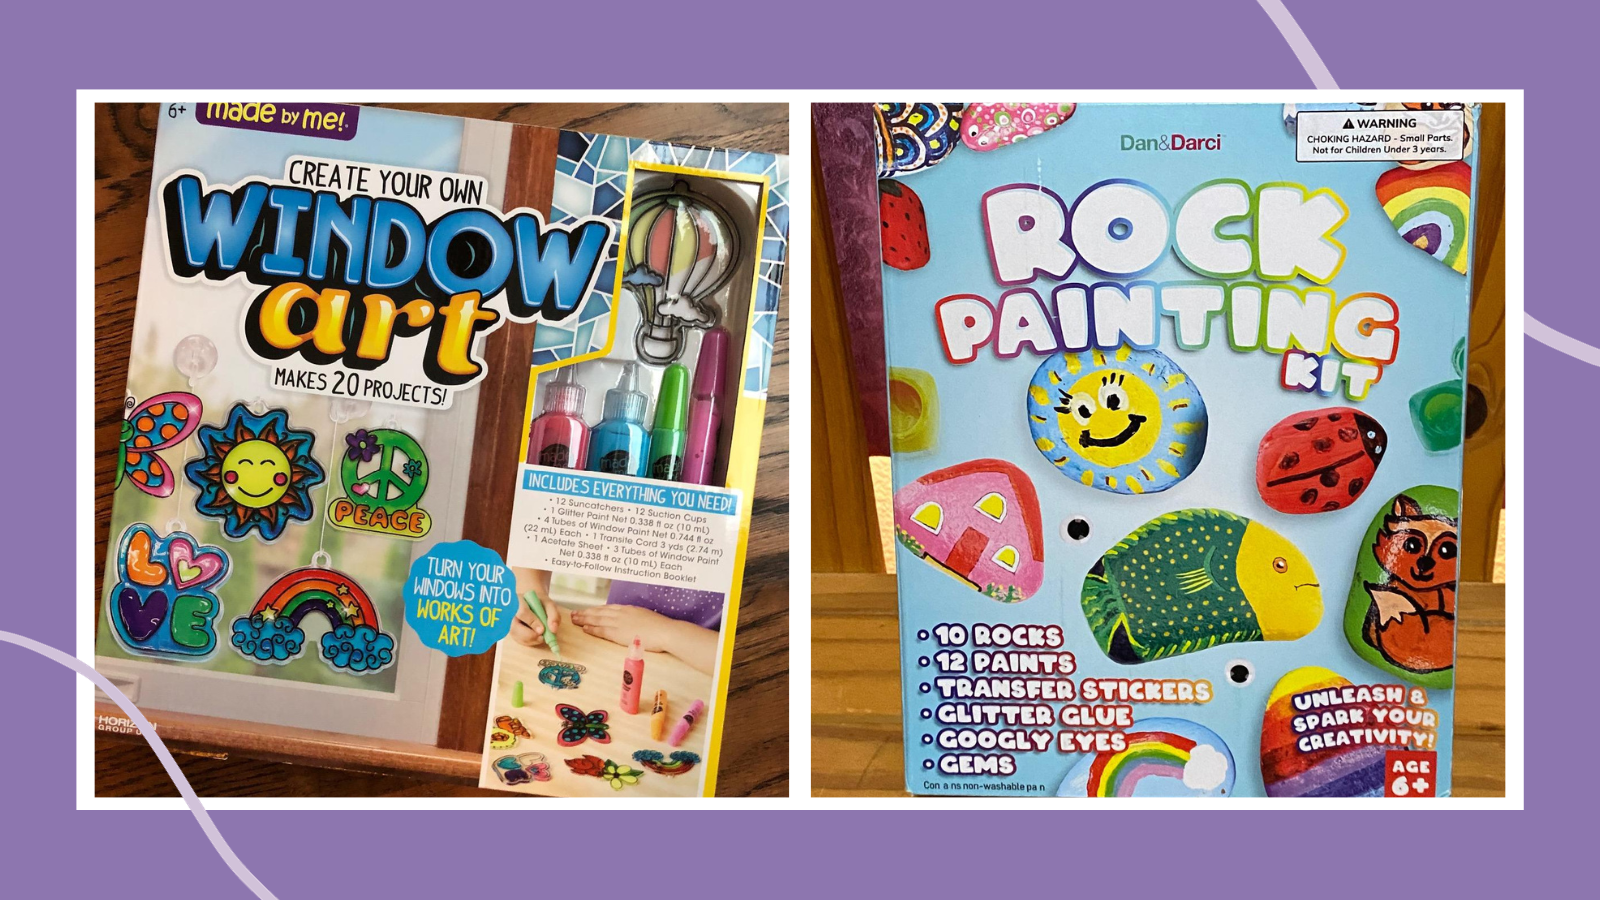 Examples of art gifts including a box of window art and a rock painting kit.